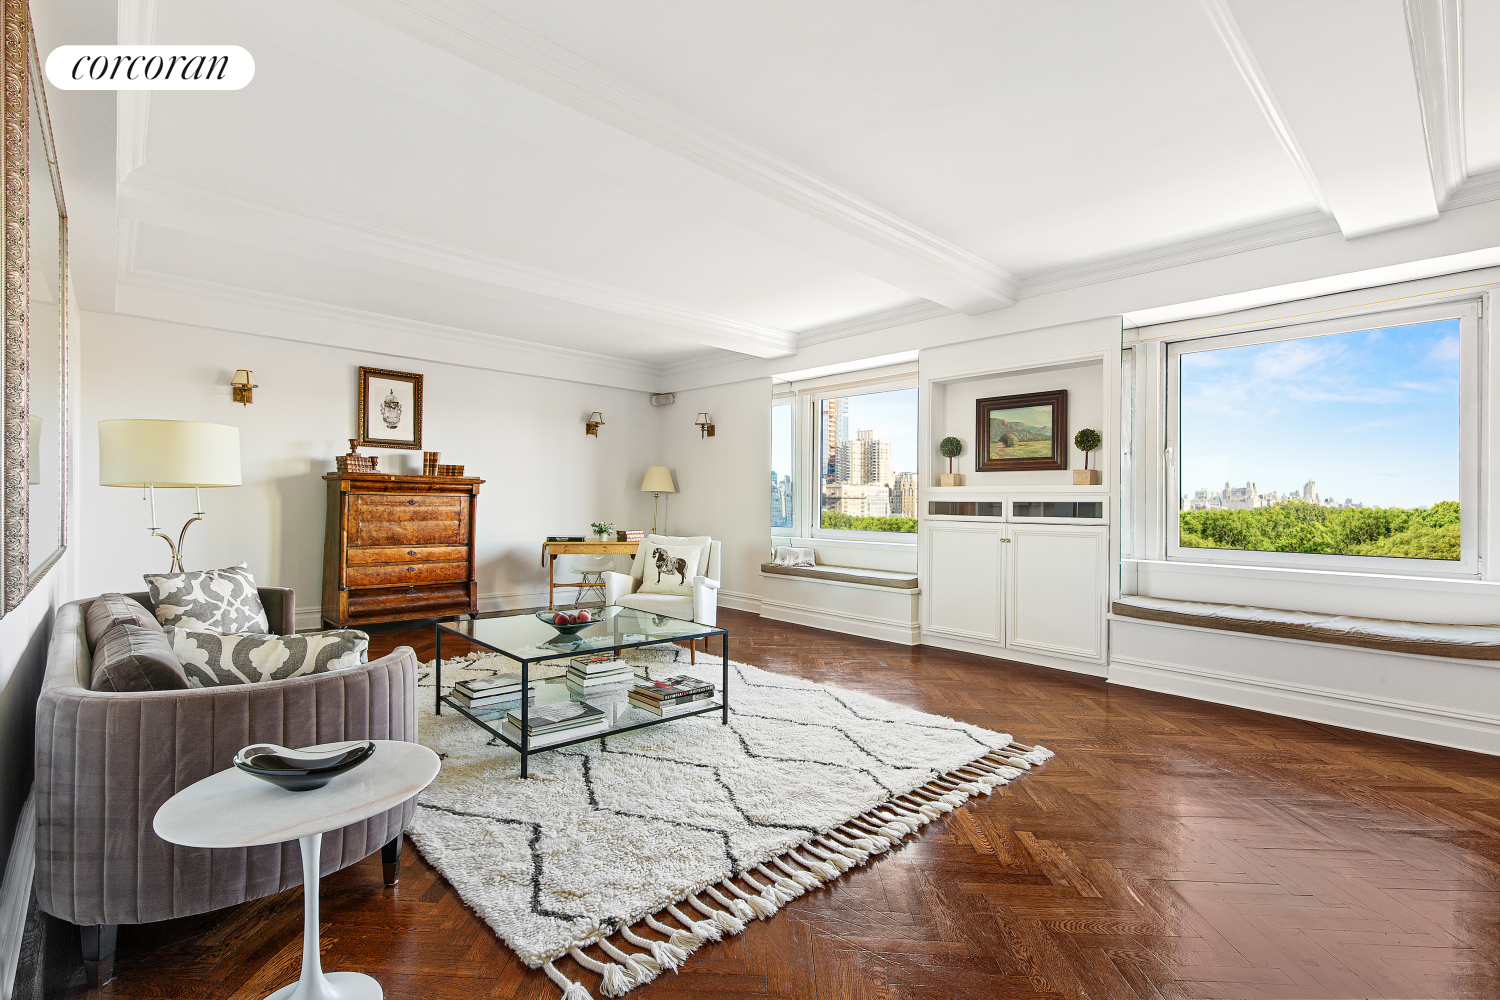 160 Central Park 1115A, Central Park South, Midtown West, NYC - 2 Bedrooms  
2 Bathrooms  
5 Rooms - 